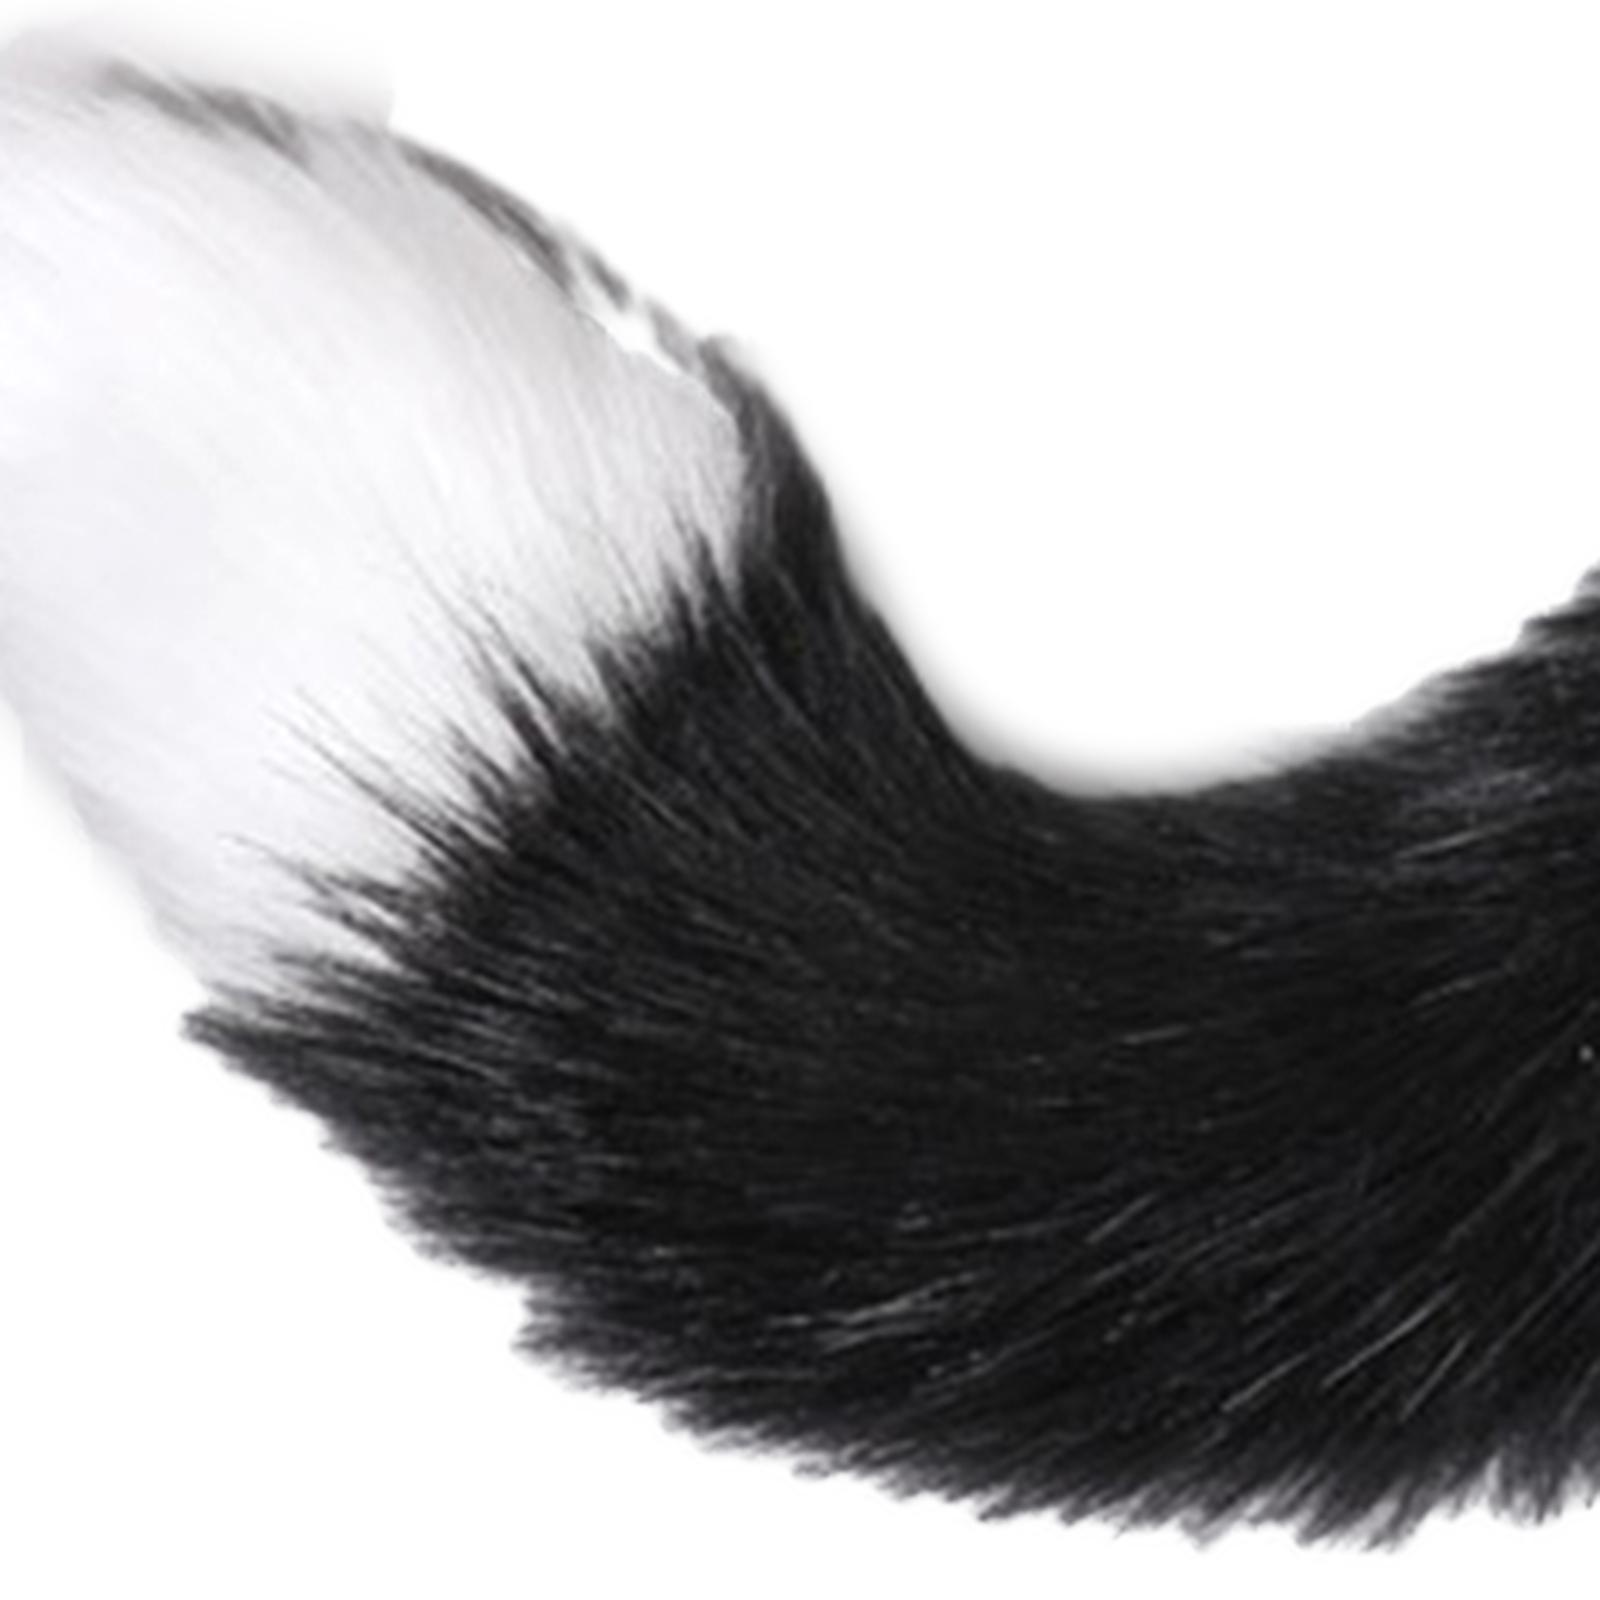 Ears and Tail Set Cosplay Props Cat Ear for Fancy Dress Costume Accessories